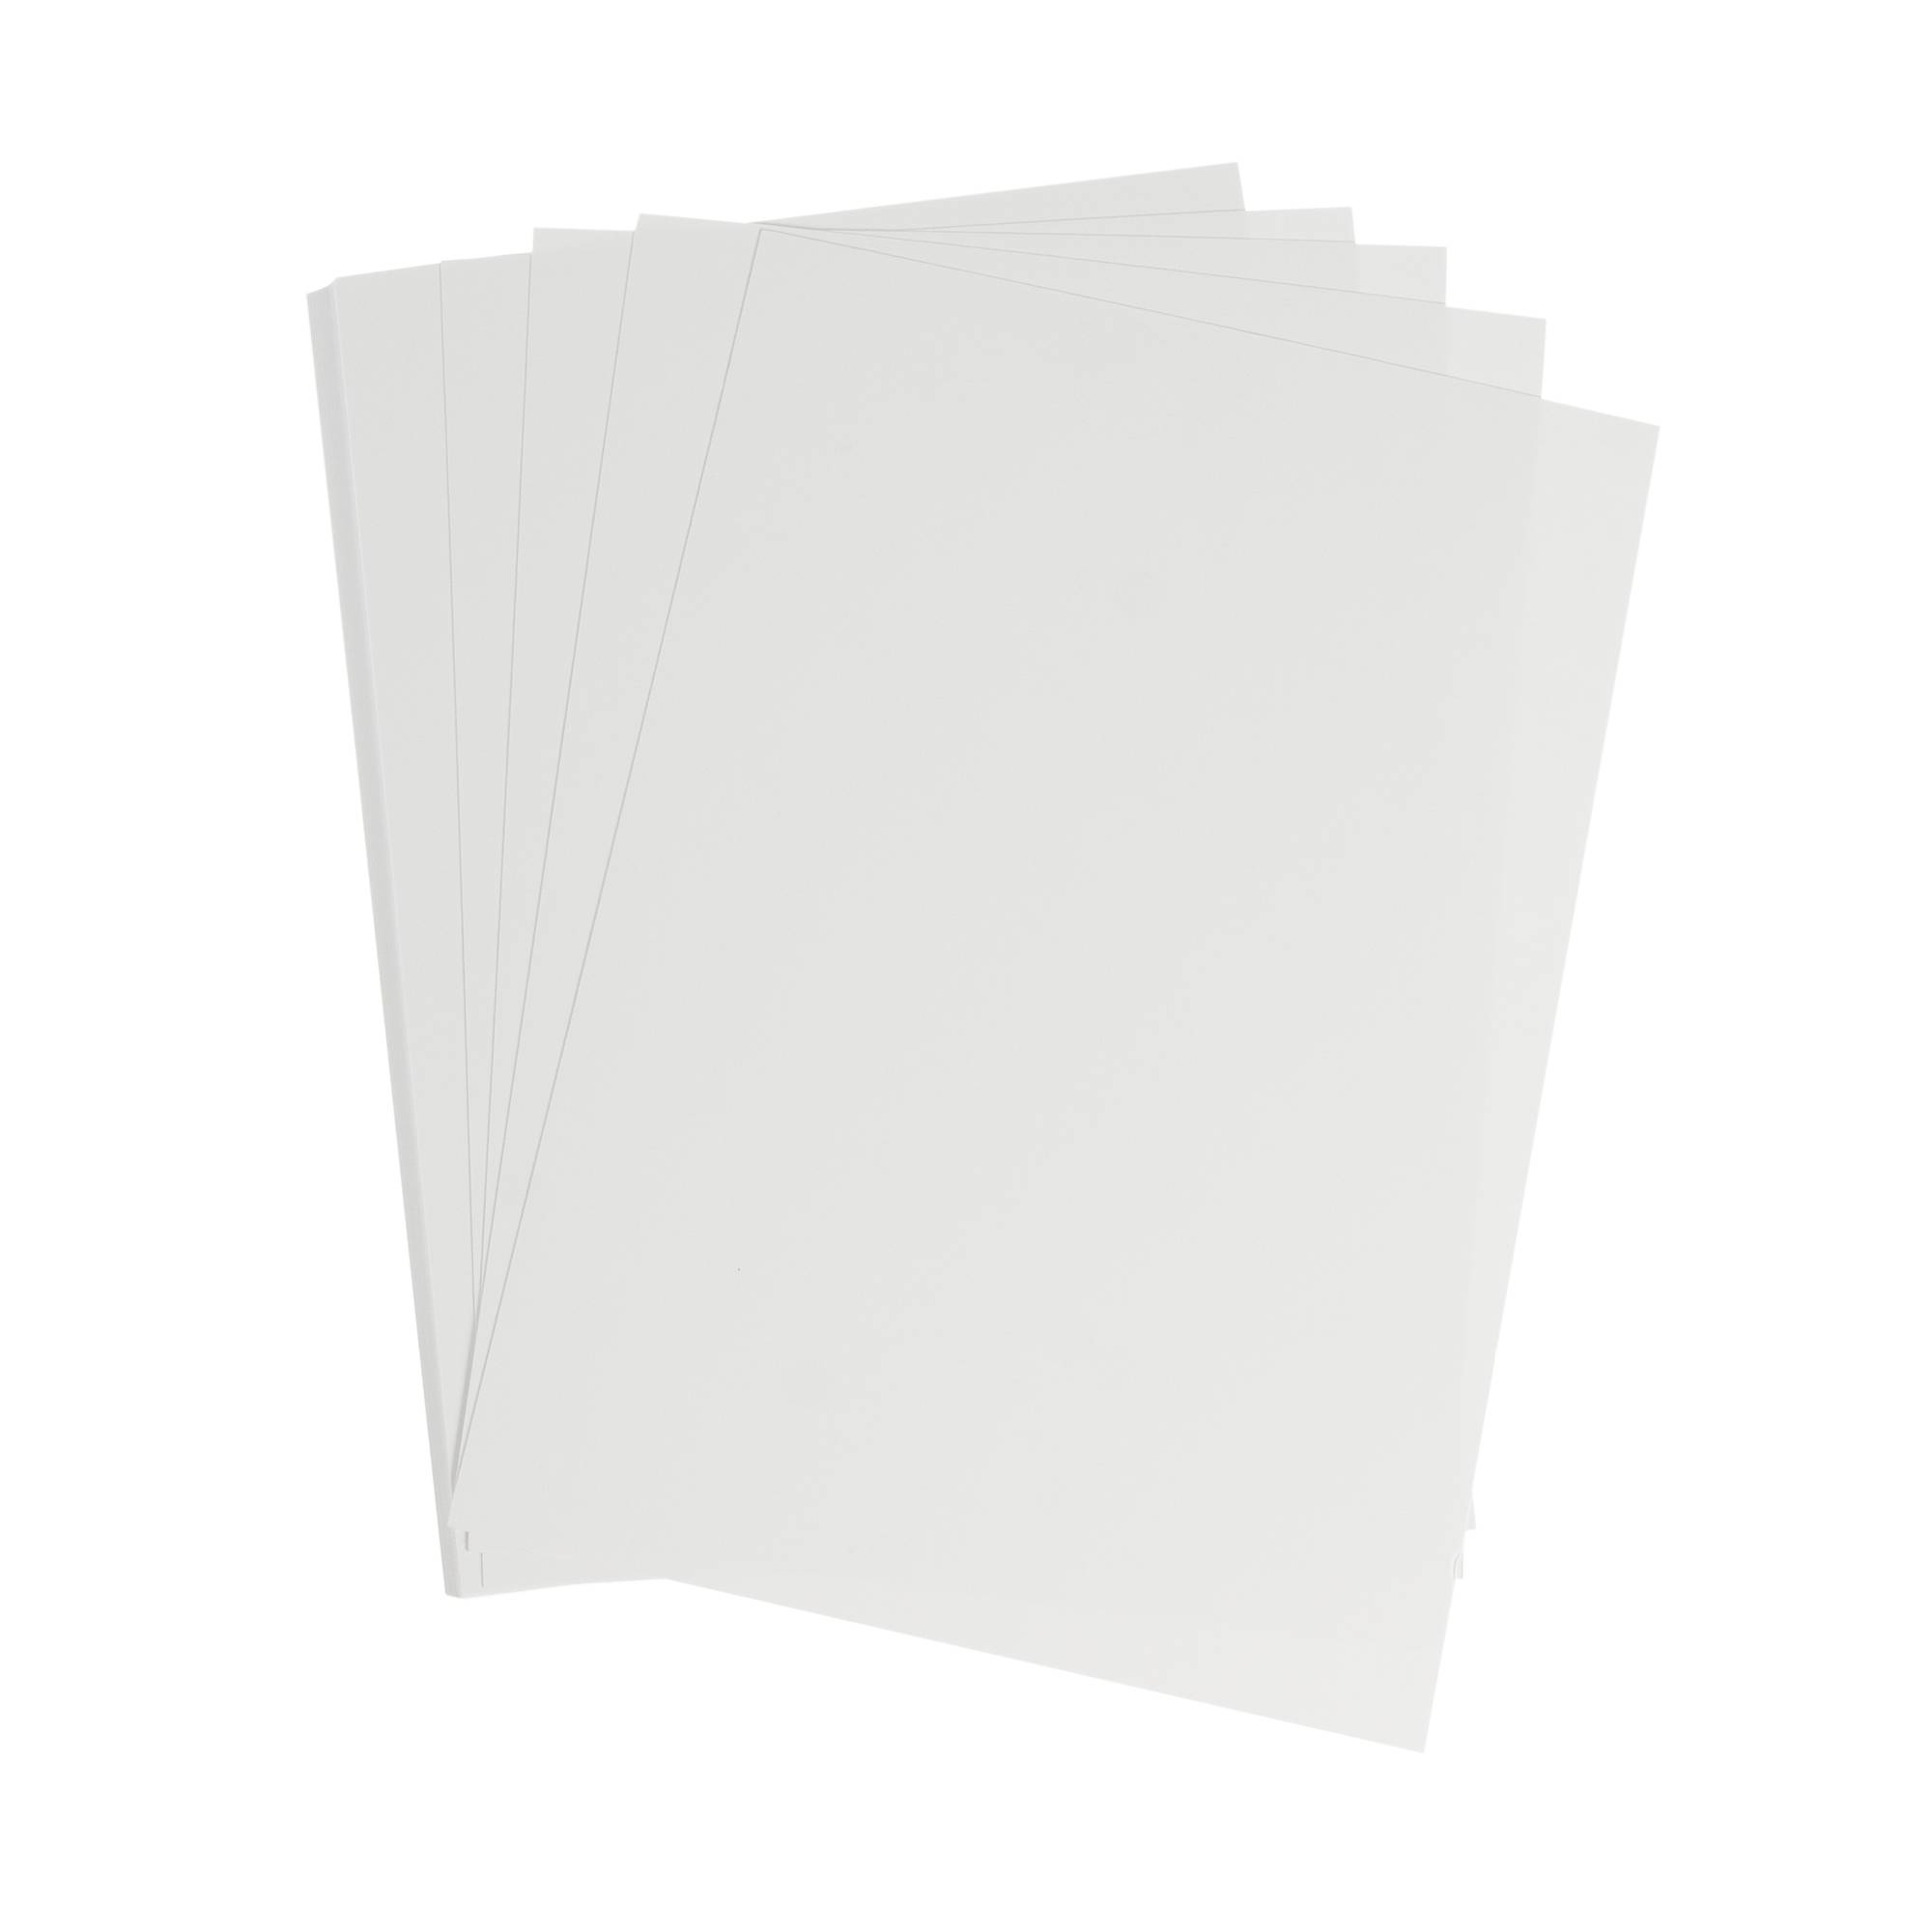 100 SHEETS A4 WHITE 300 gsm THICK CARDS PRINTER CRAFT MAKING DECOUPAGE LOT  PAPER